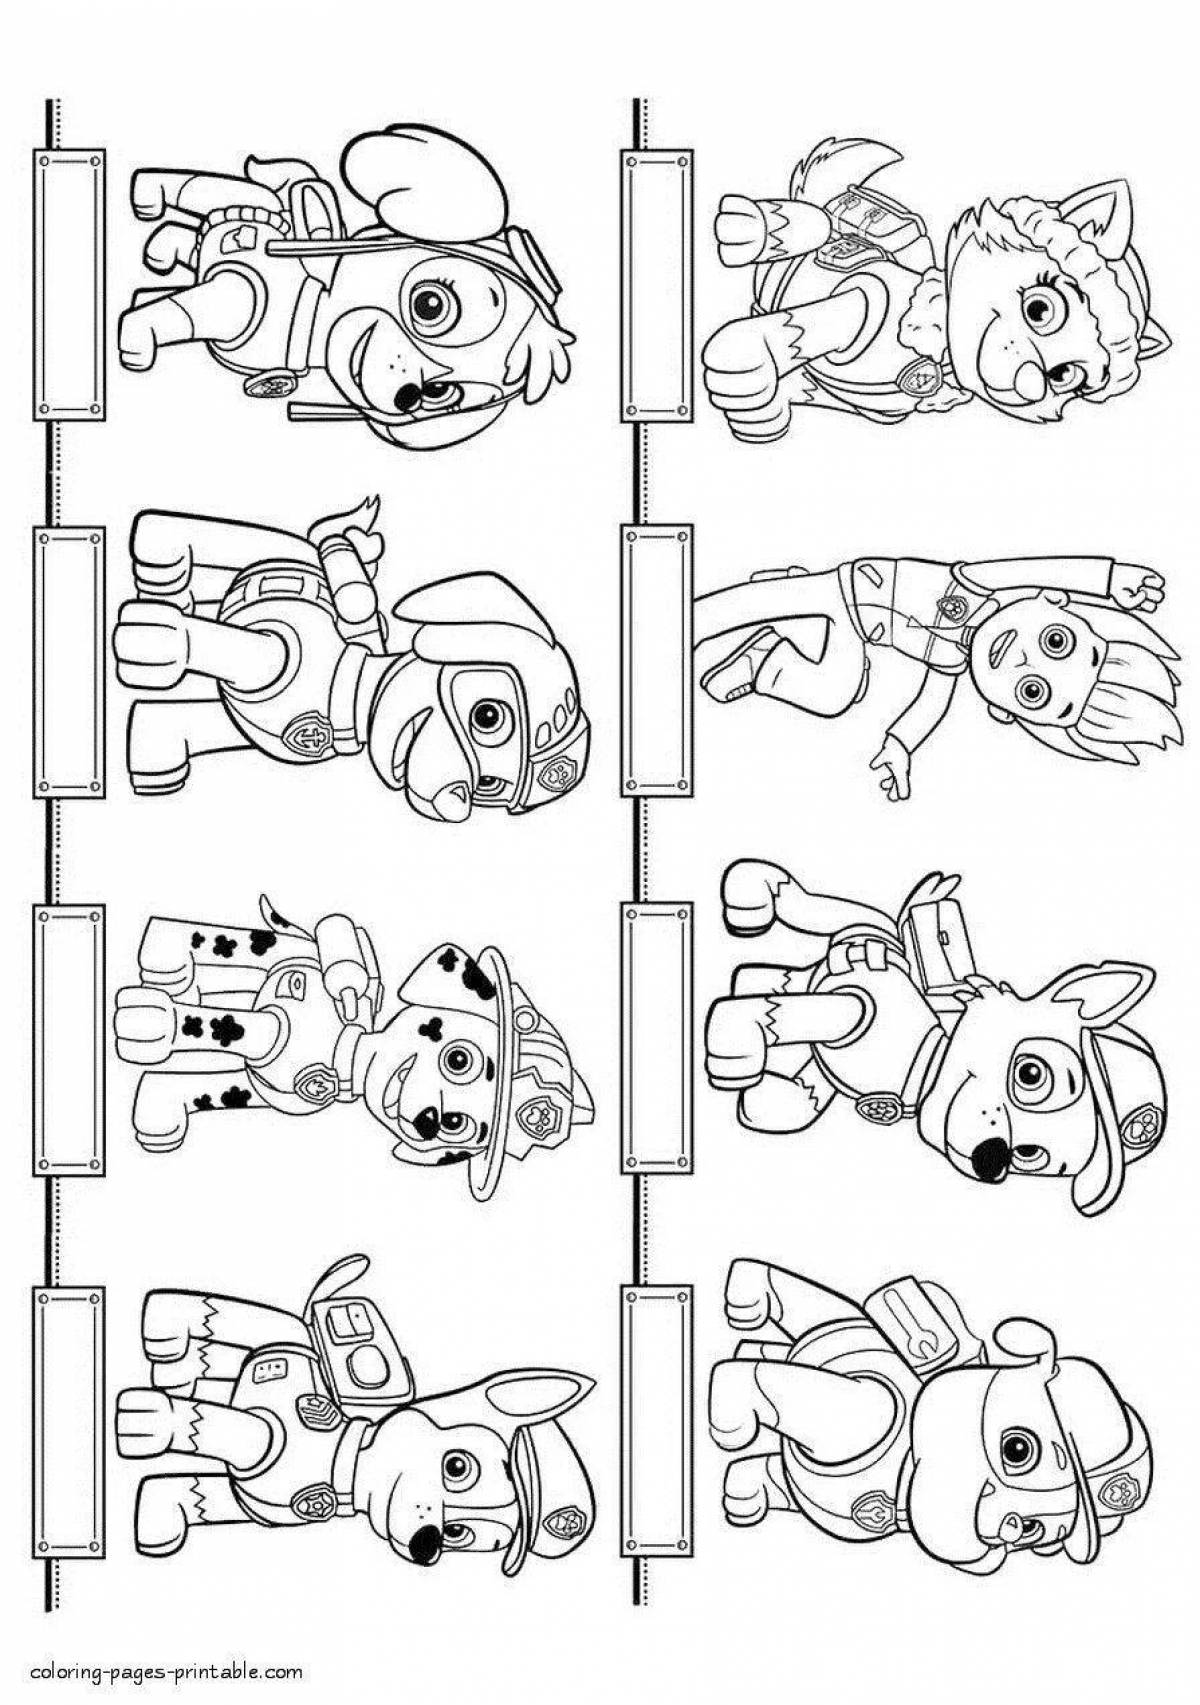 Amazing coloring page paw patrol all heroes